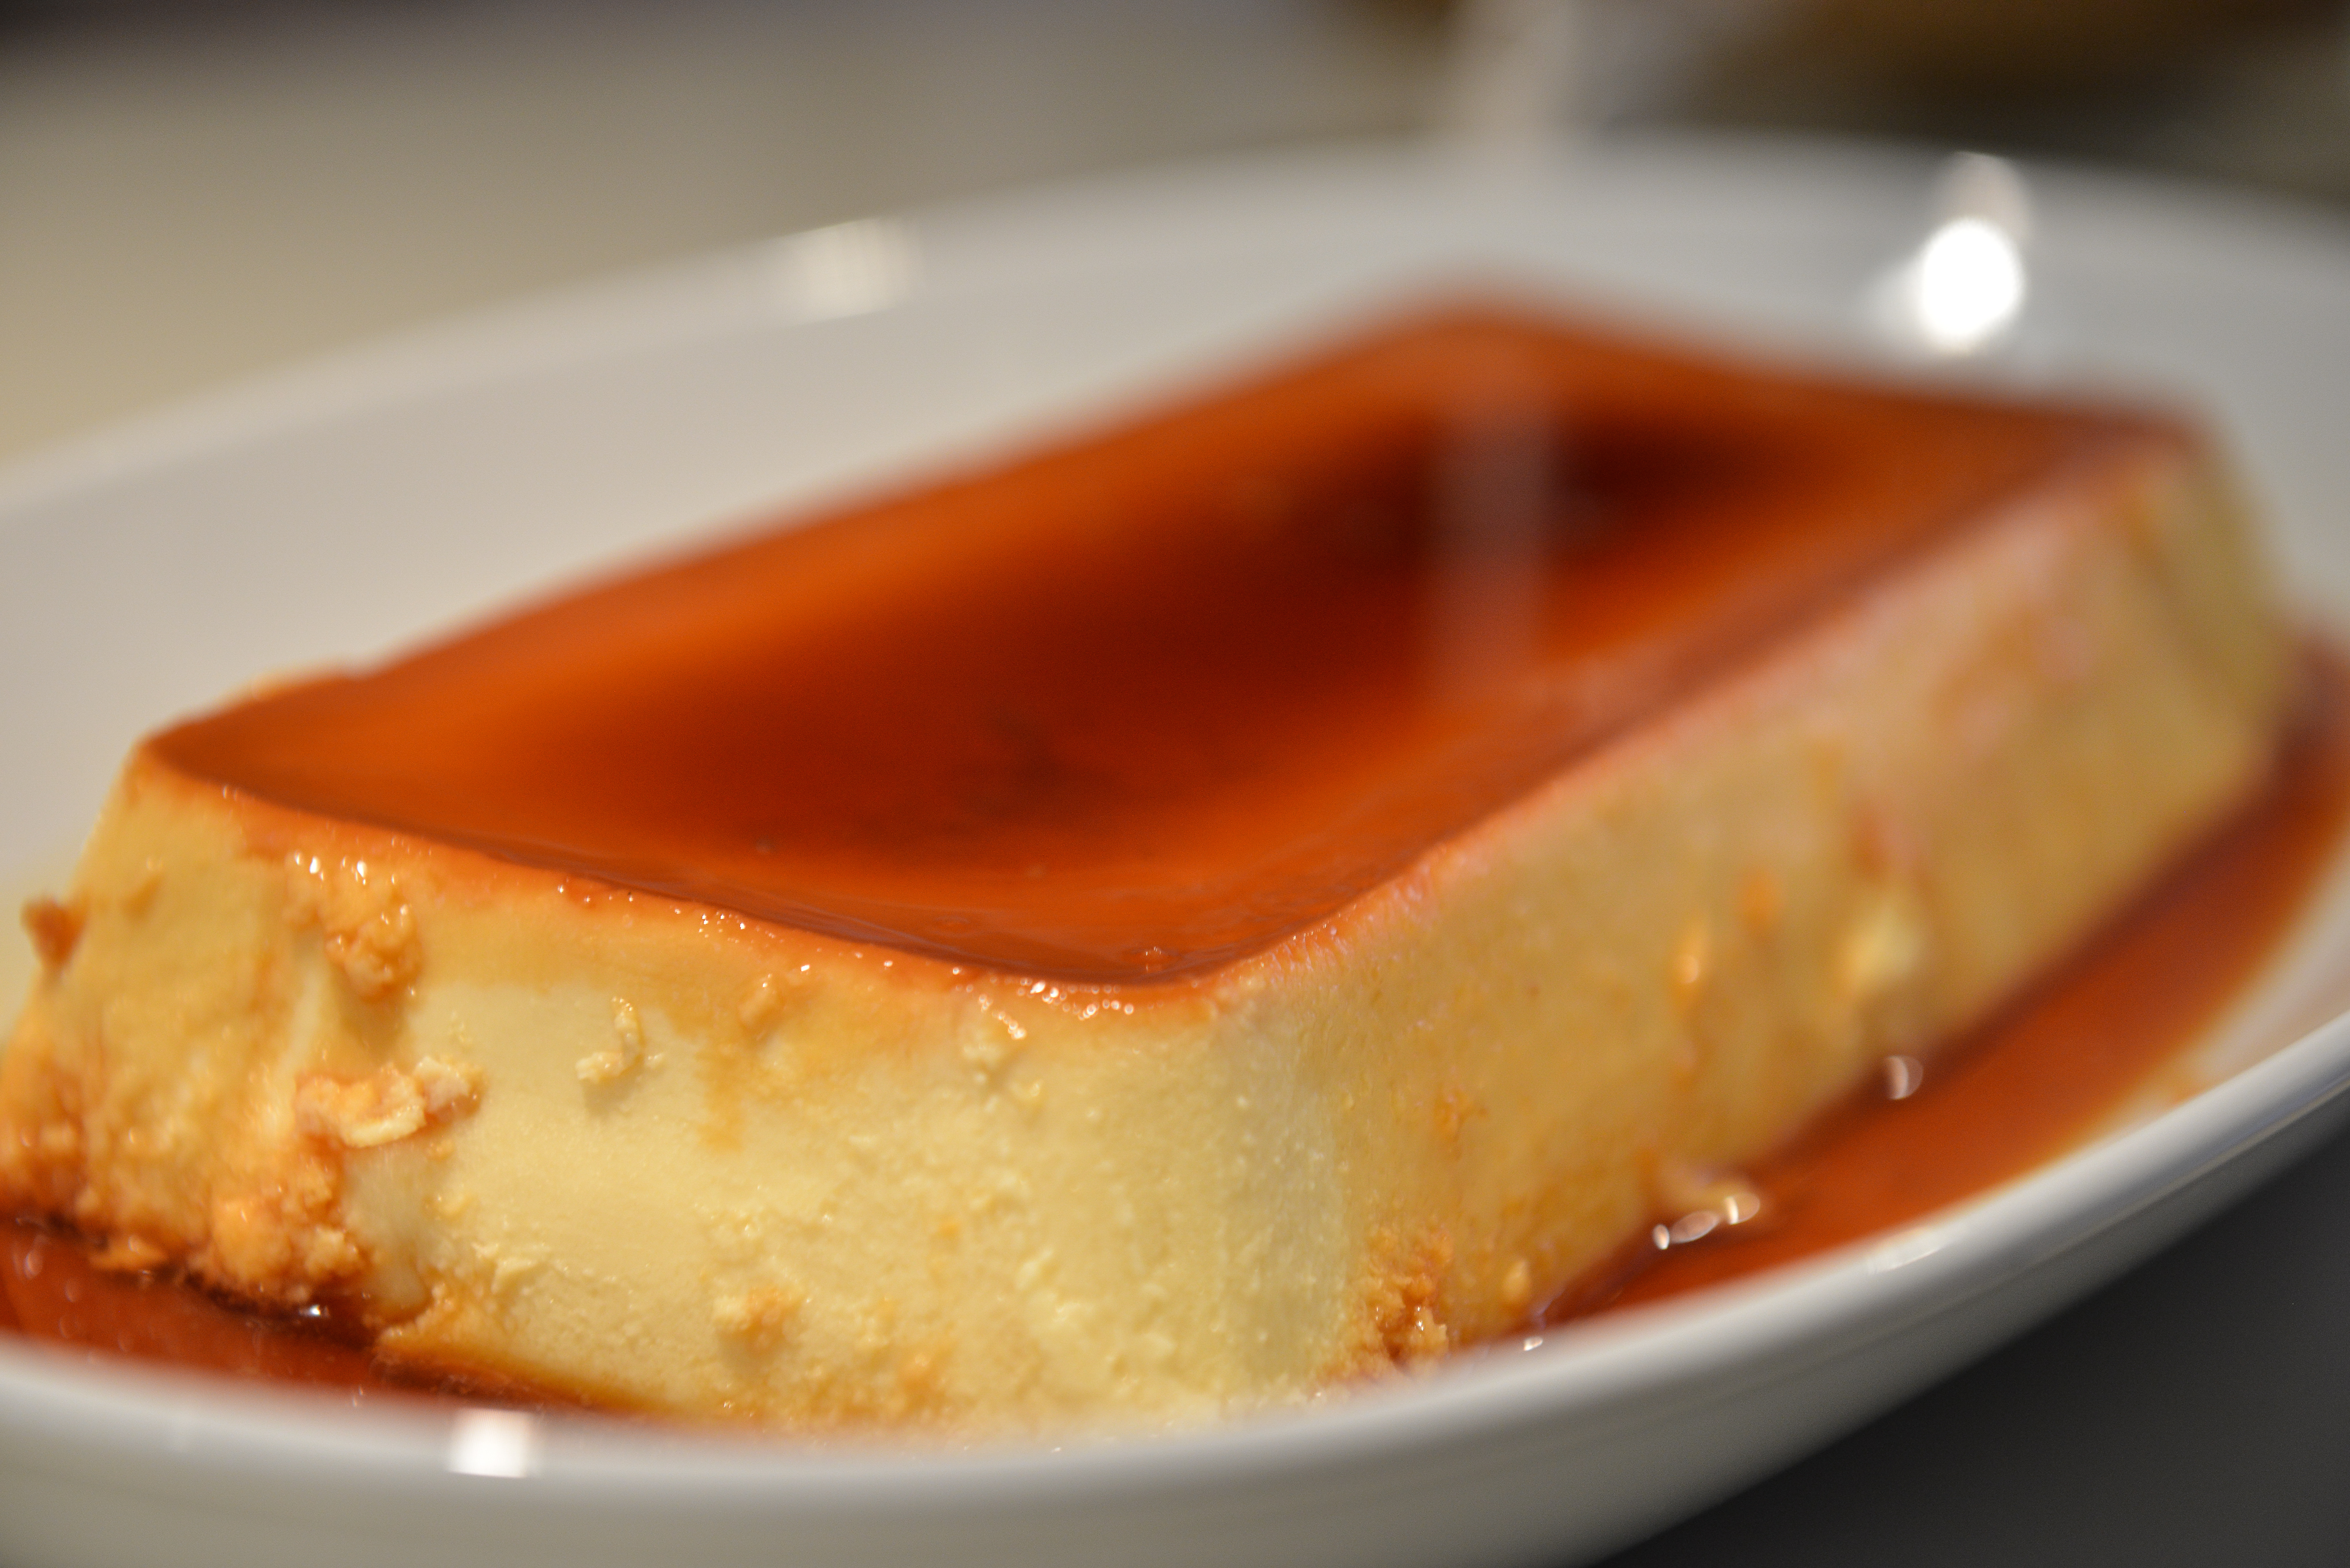 Flan: How do I love thee? Let me count the ways.